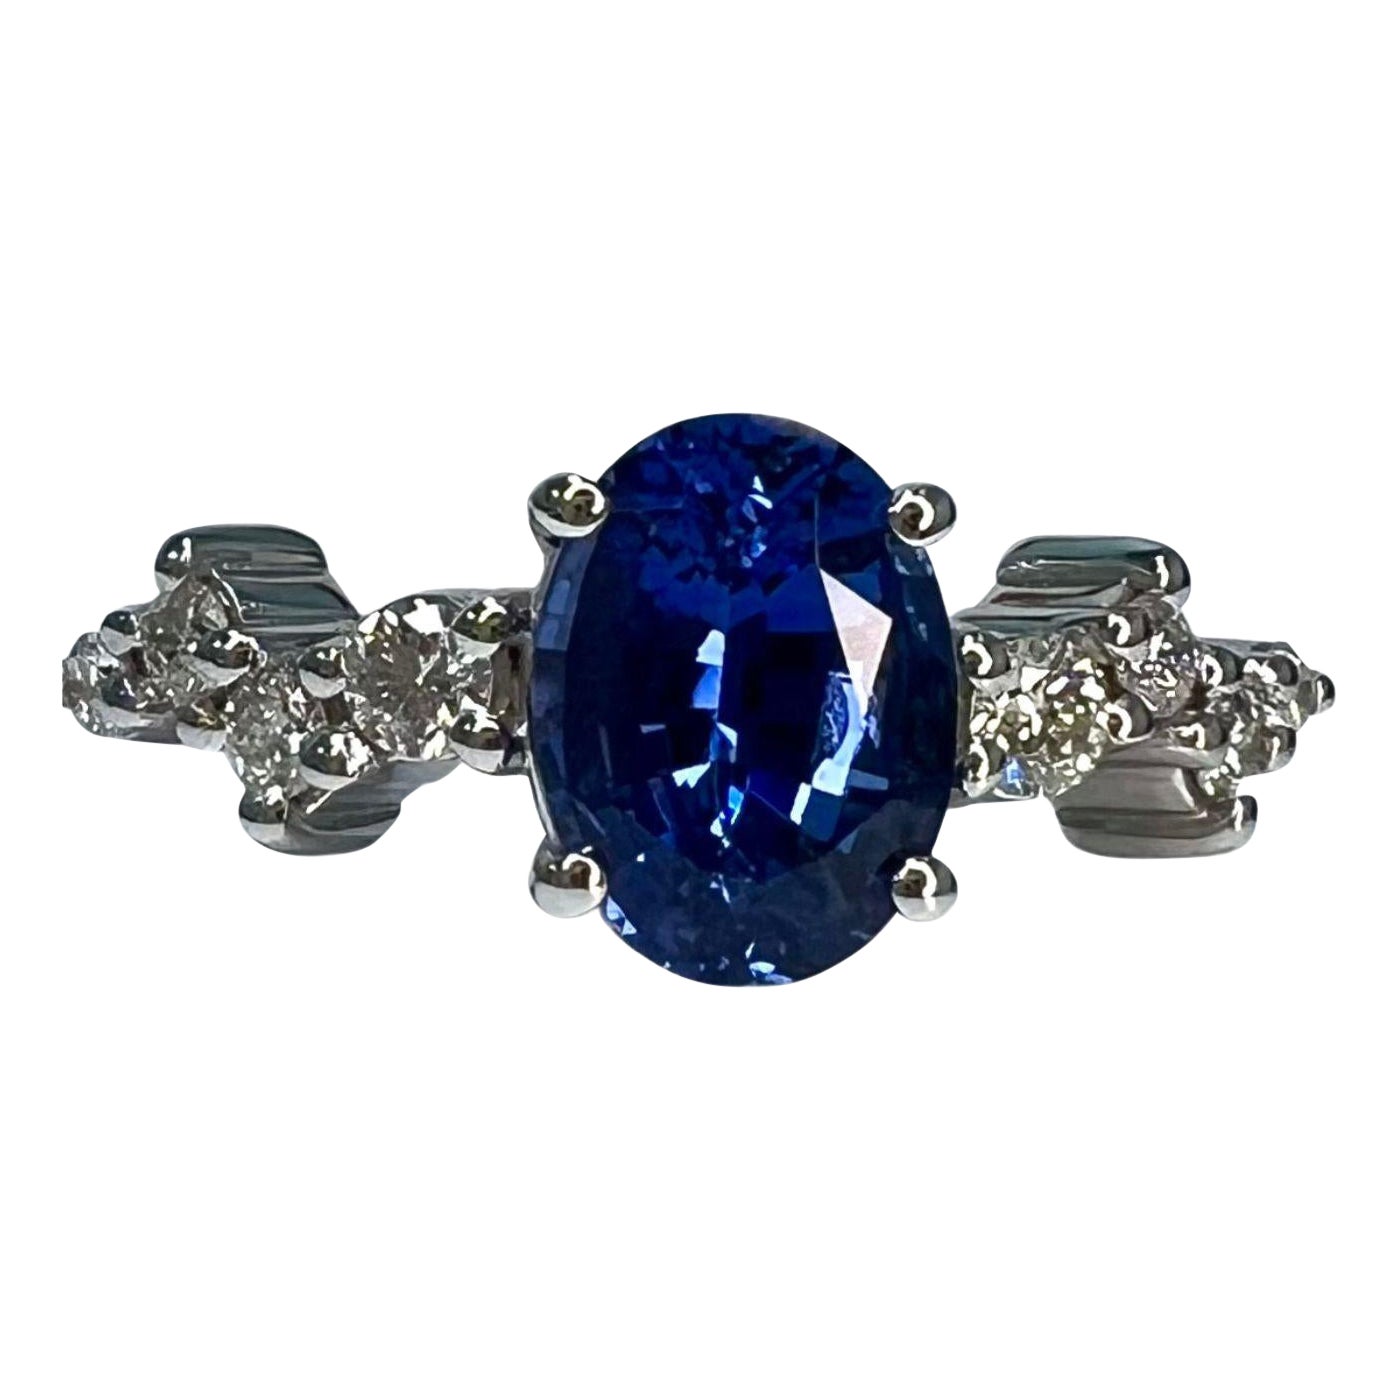 1.7 Carat Sapphire Oval Cluster Ring 18k White Gold